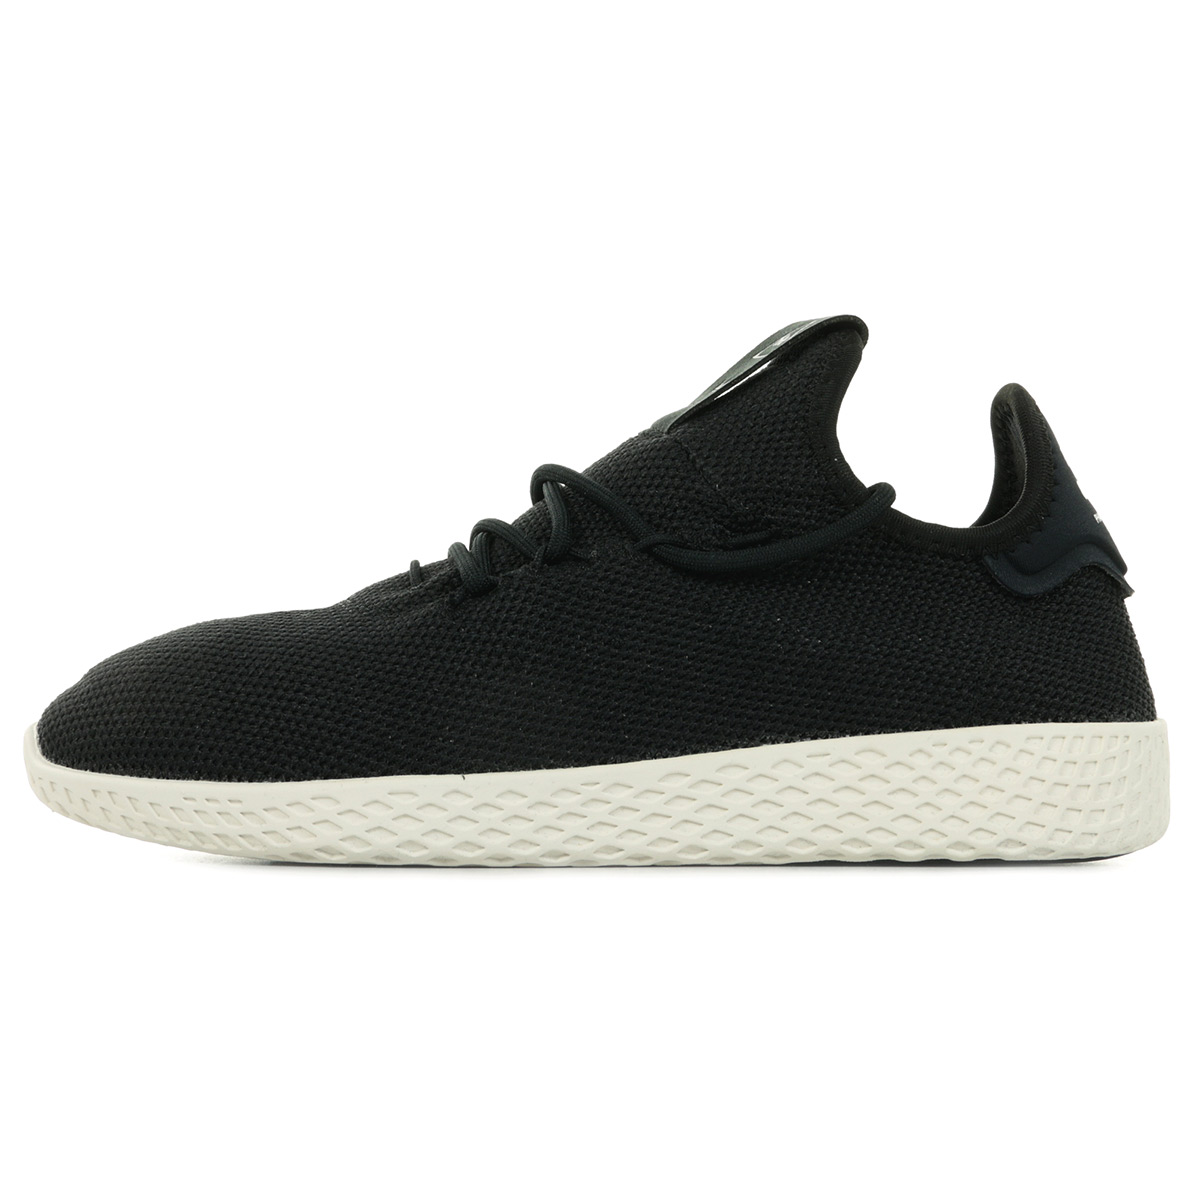 adidas pw tennis hu homme chaussures